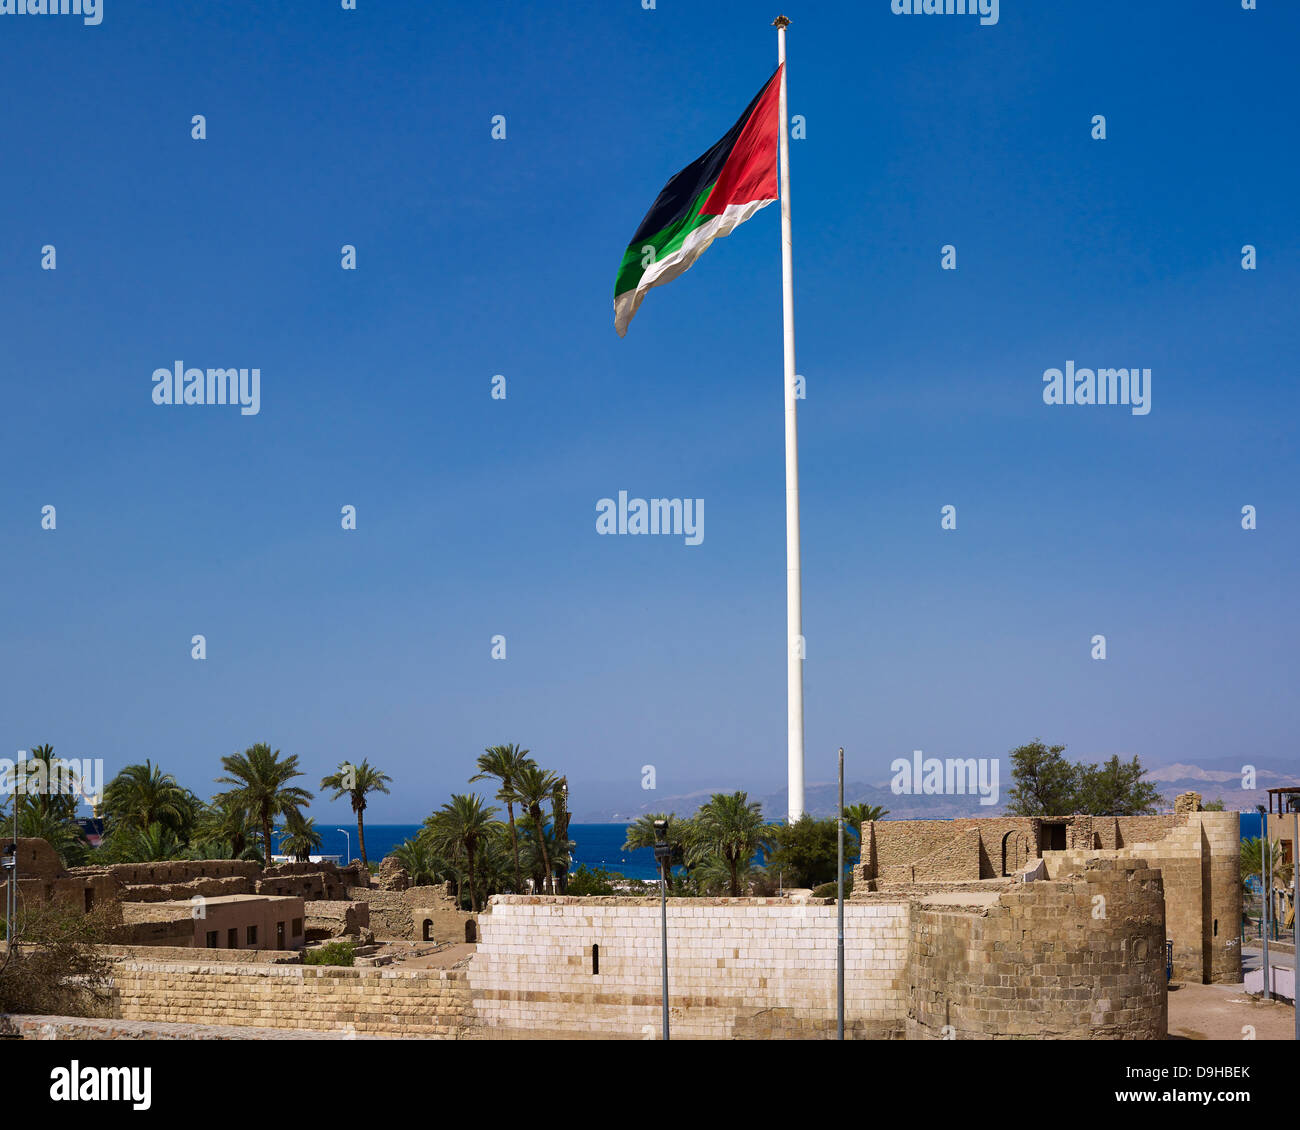 Fortress with Jordanian flag in Aqaba, Jordan, Middle East Stock Photo